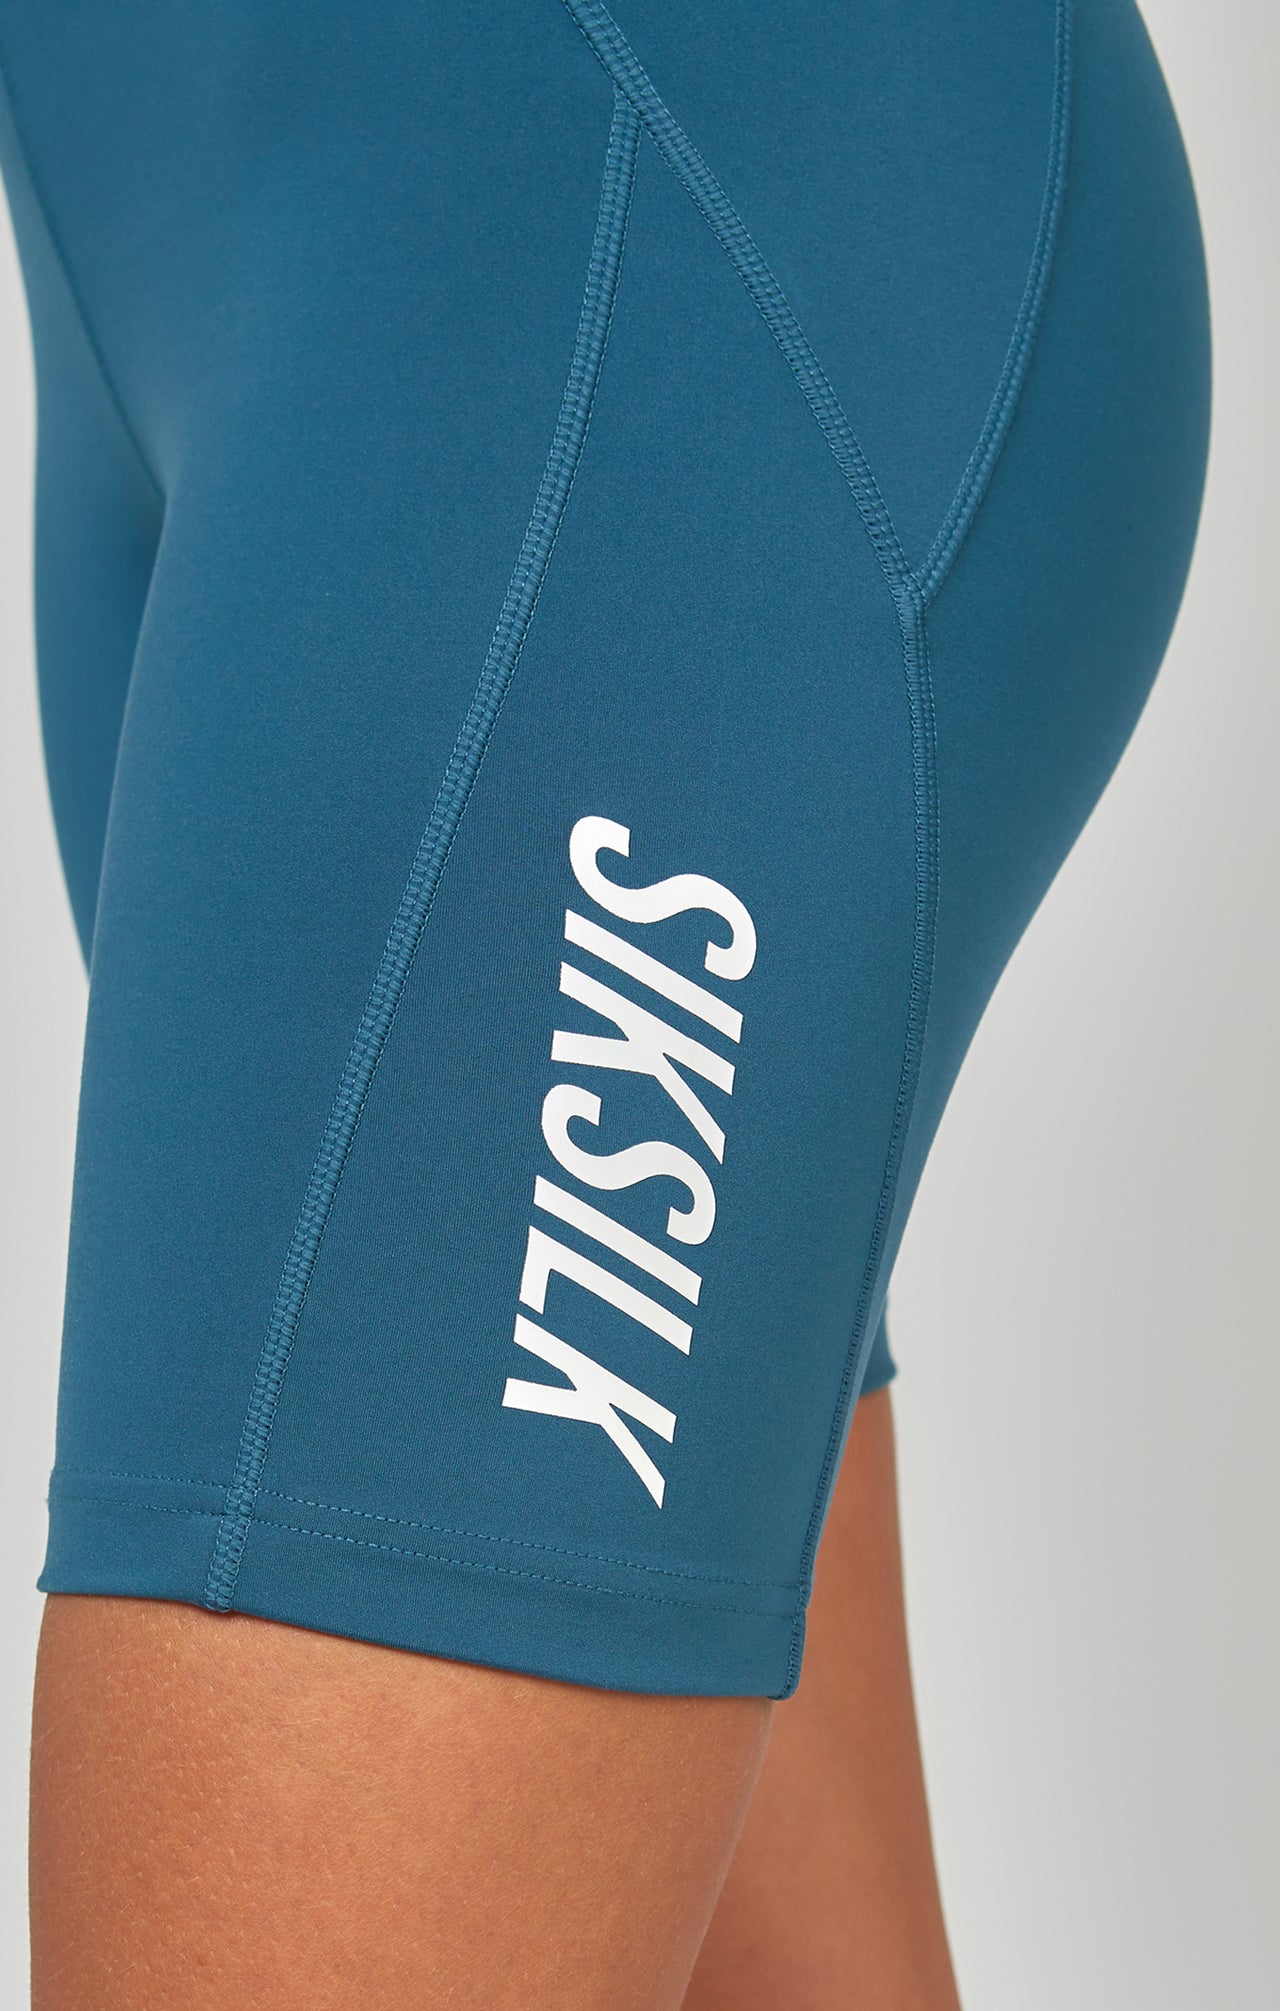 Teal Sports Essential Cycling Short (5)